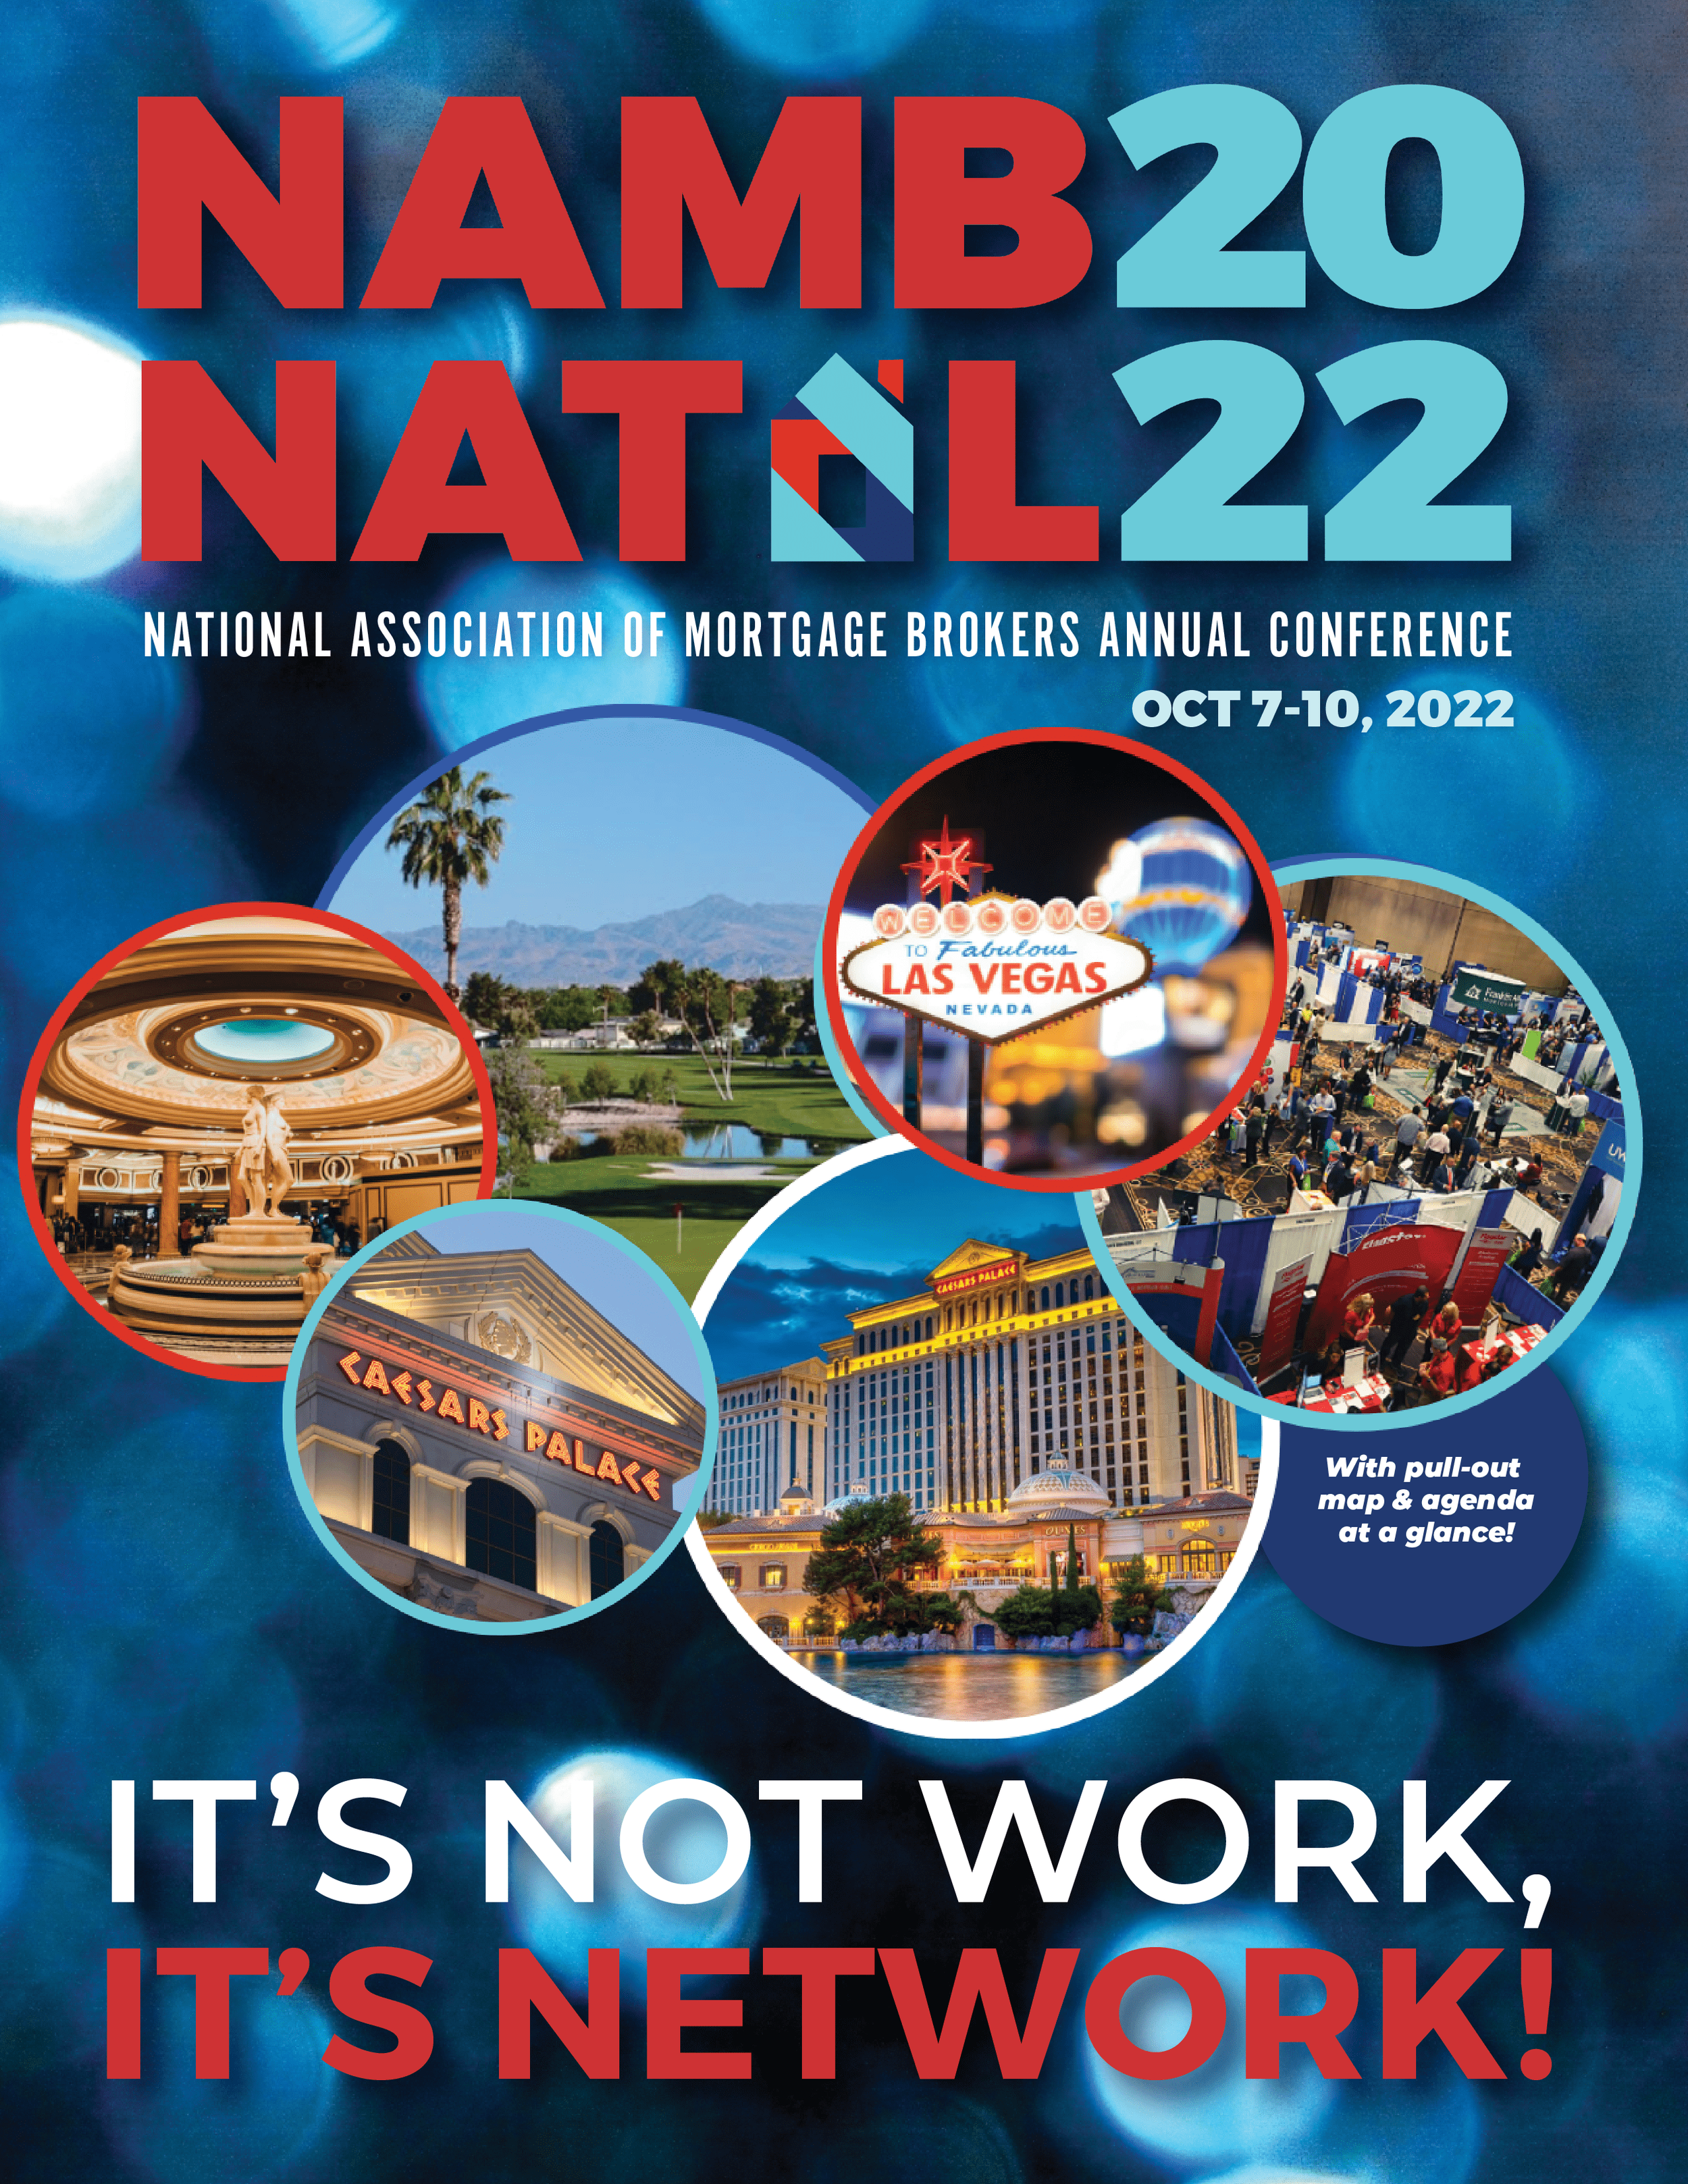 Nat'l Assoc of Mortgage Brokers' annual conference guide